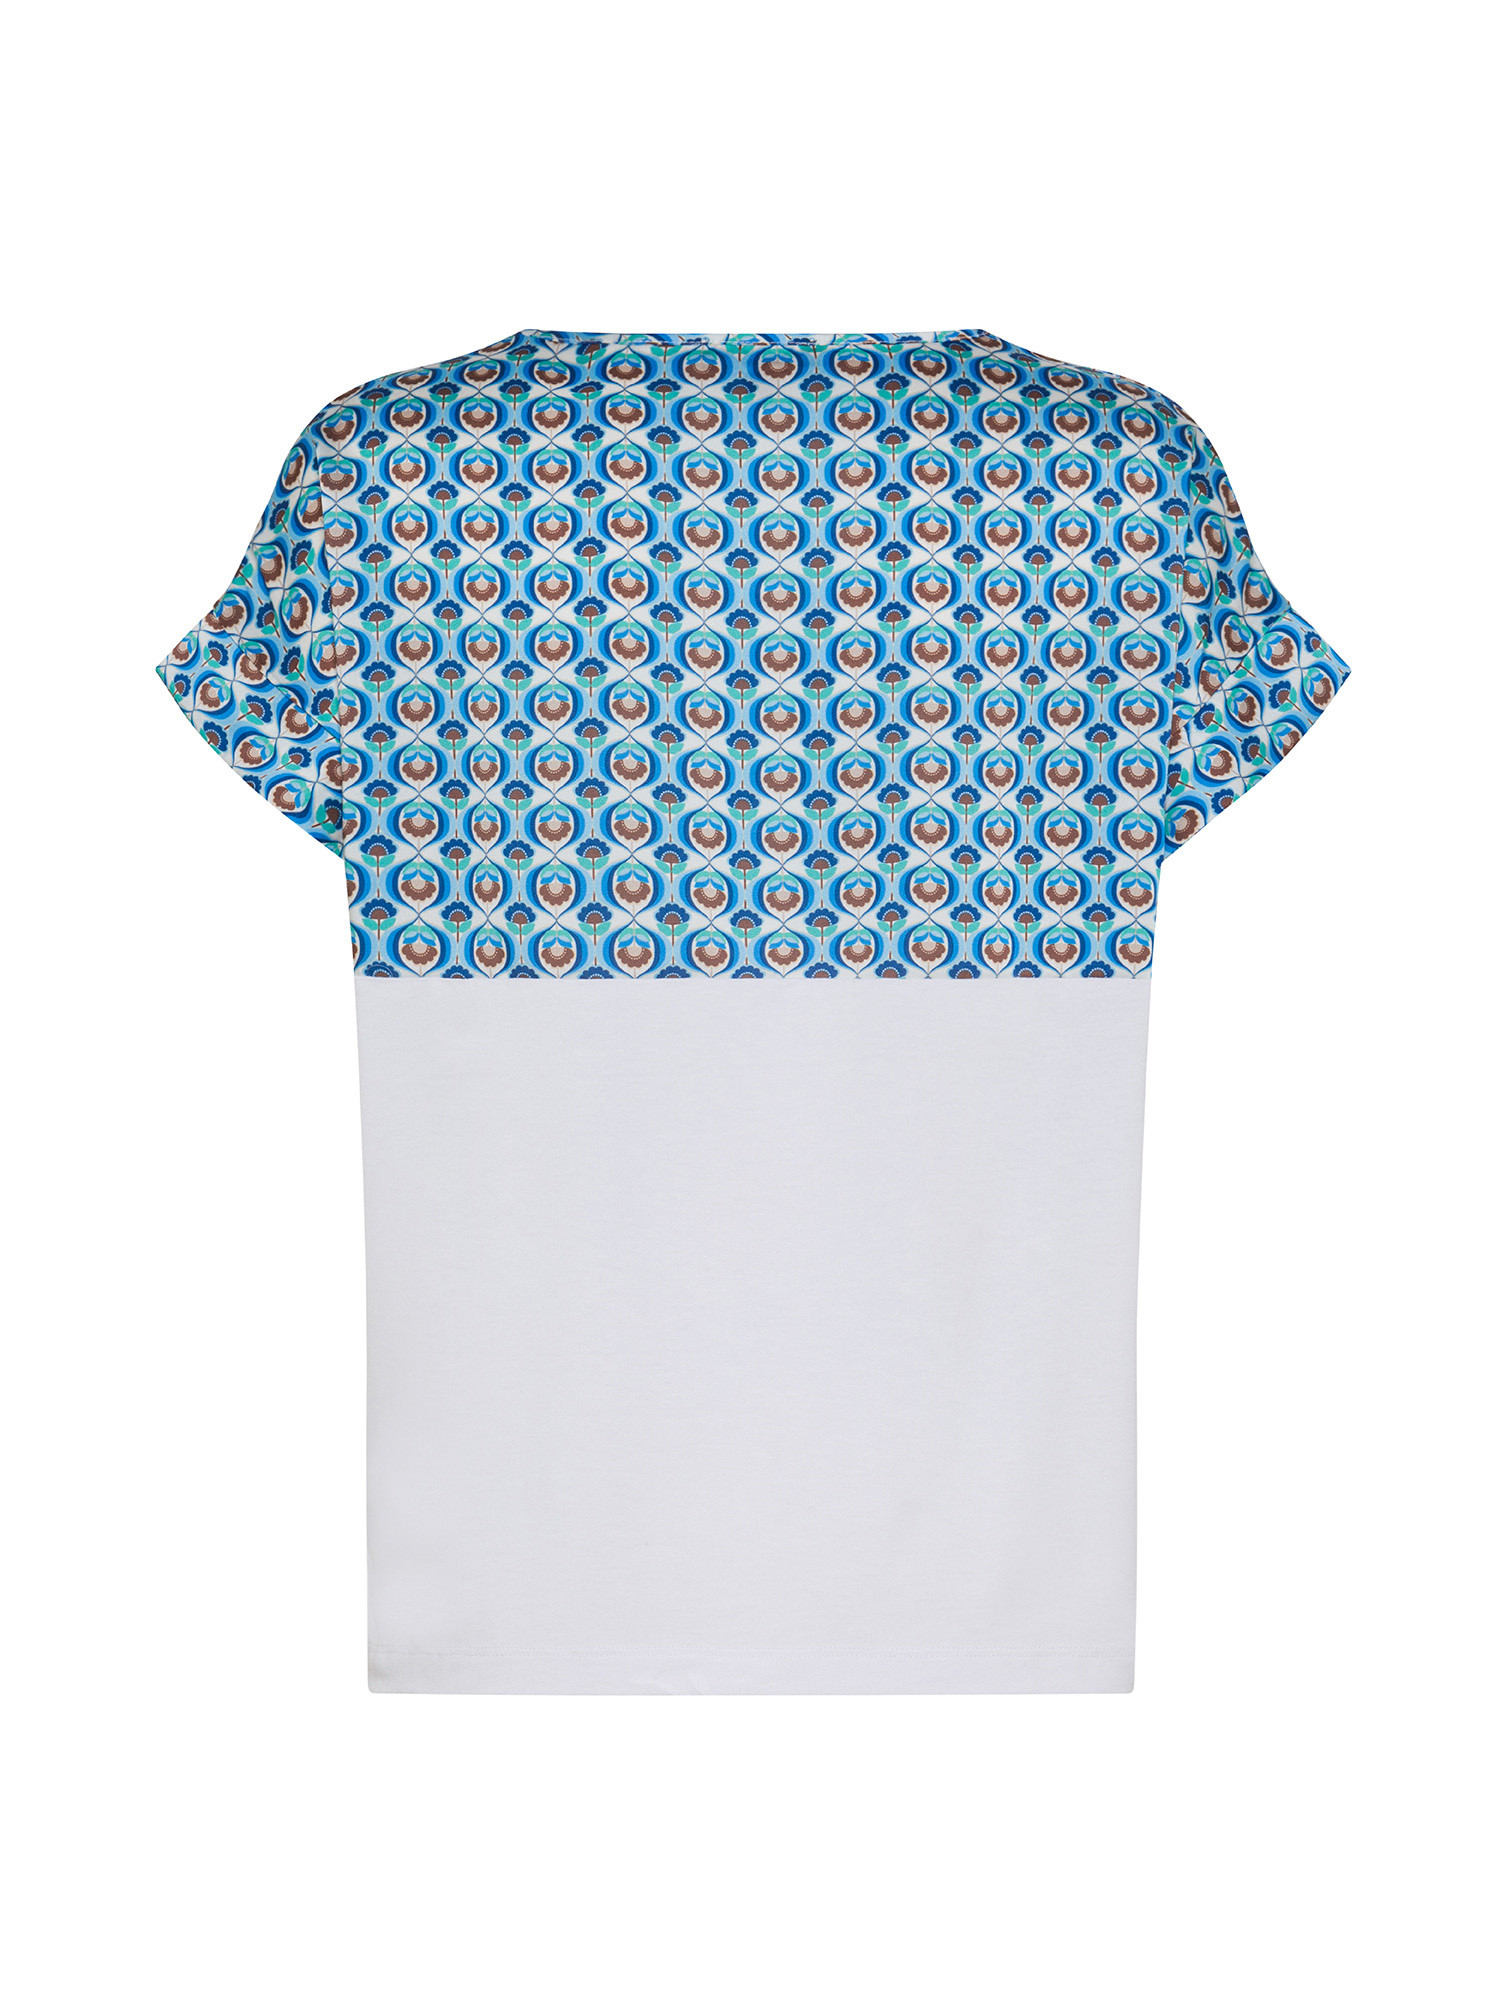 Koan - T-shirt with micro pattern, Light Blue, large image number 1